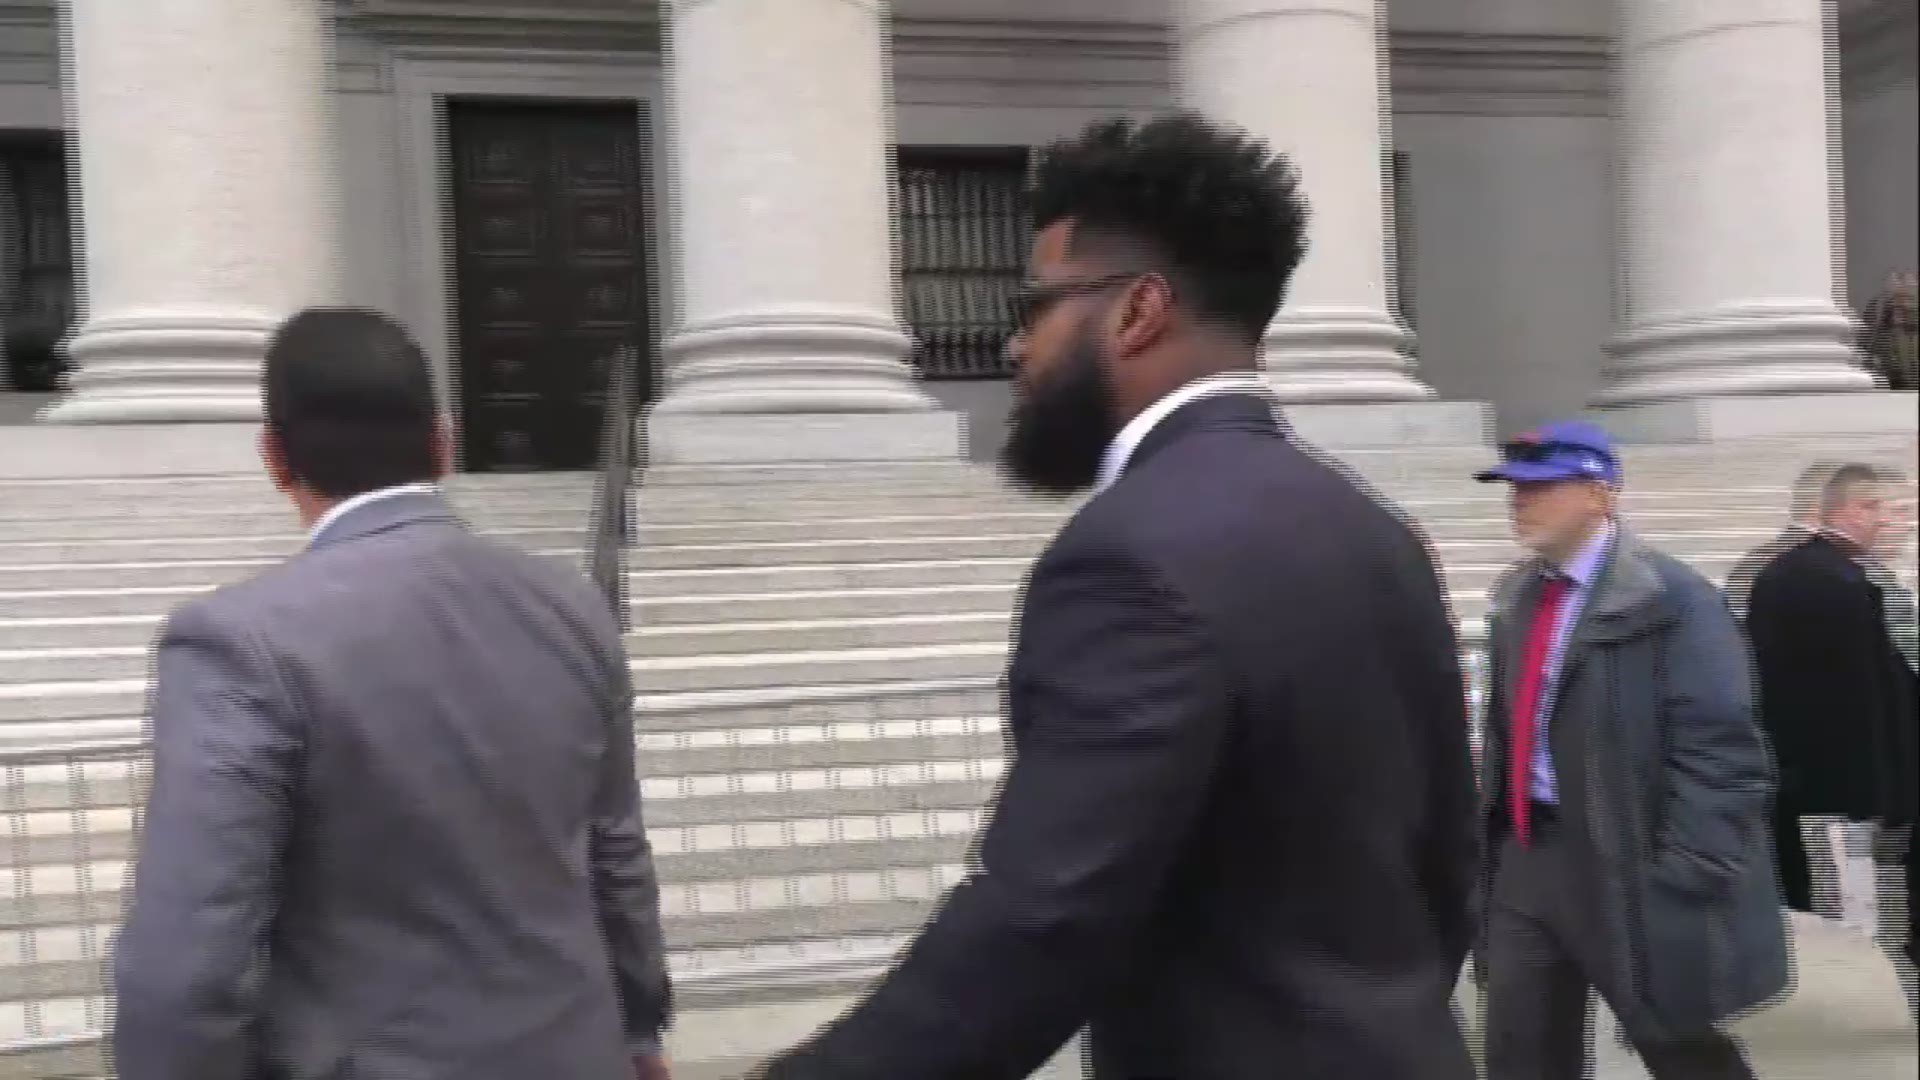 Cowboys running back Ezekiel Elliott arrives at the 2nd Circuit court in New York for a hearing on Nov. 9, 2017. ABC